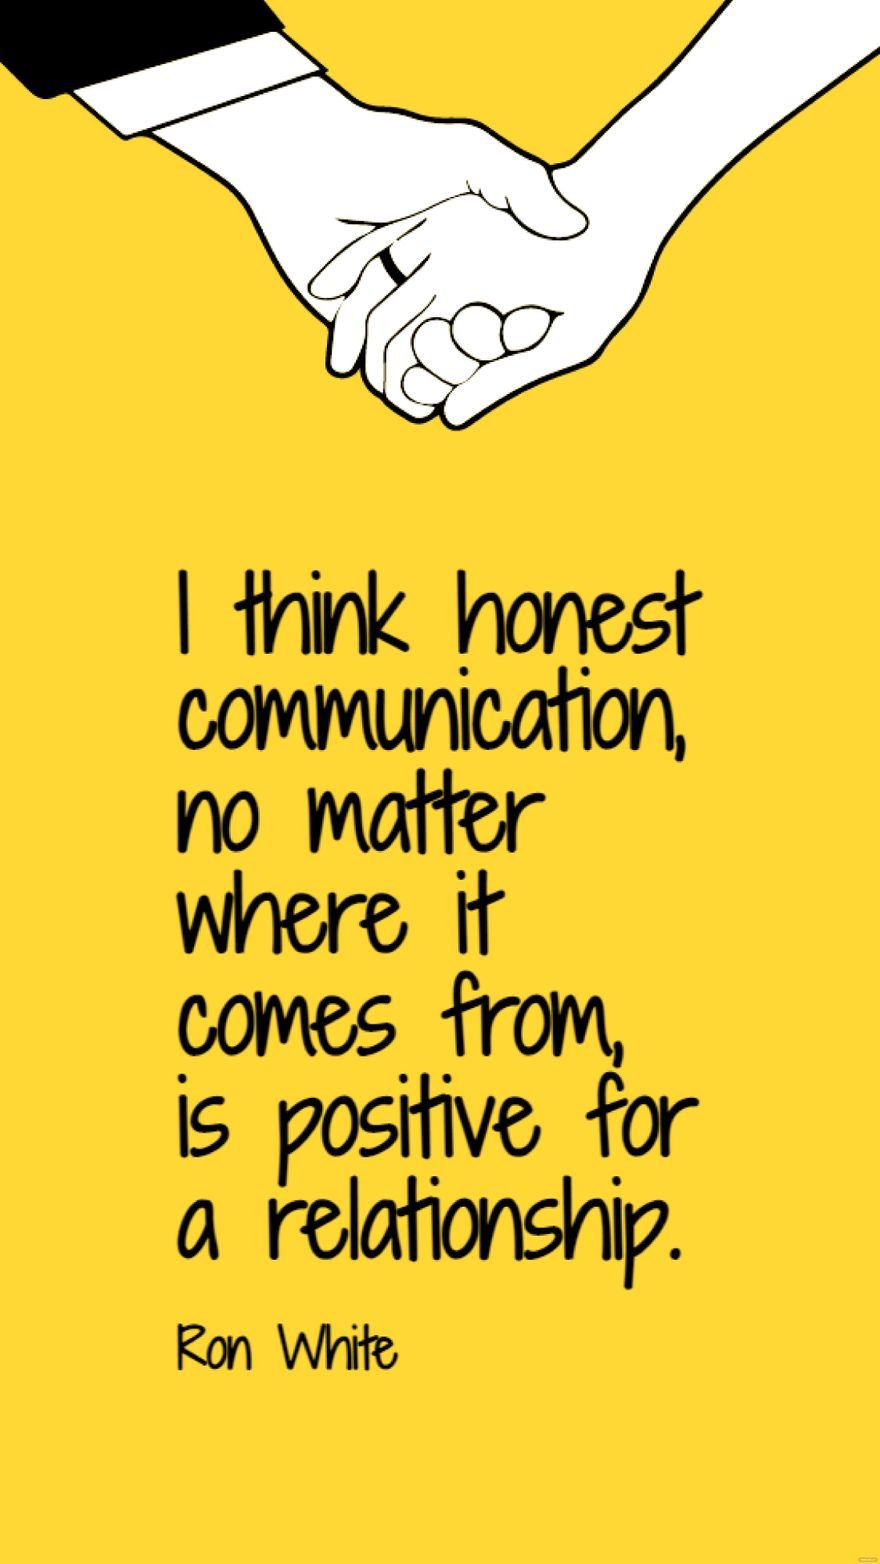 Ron White - I think honest communication, no matter where it comes from, is positive for a relationship.